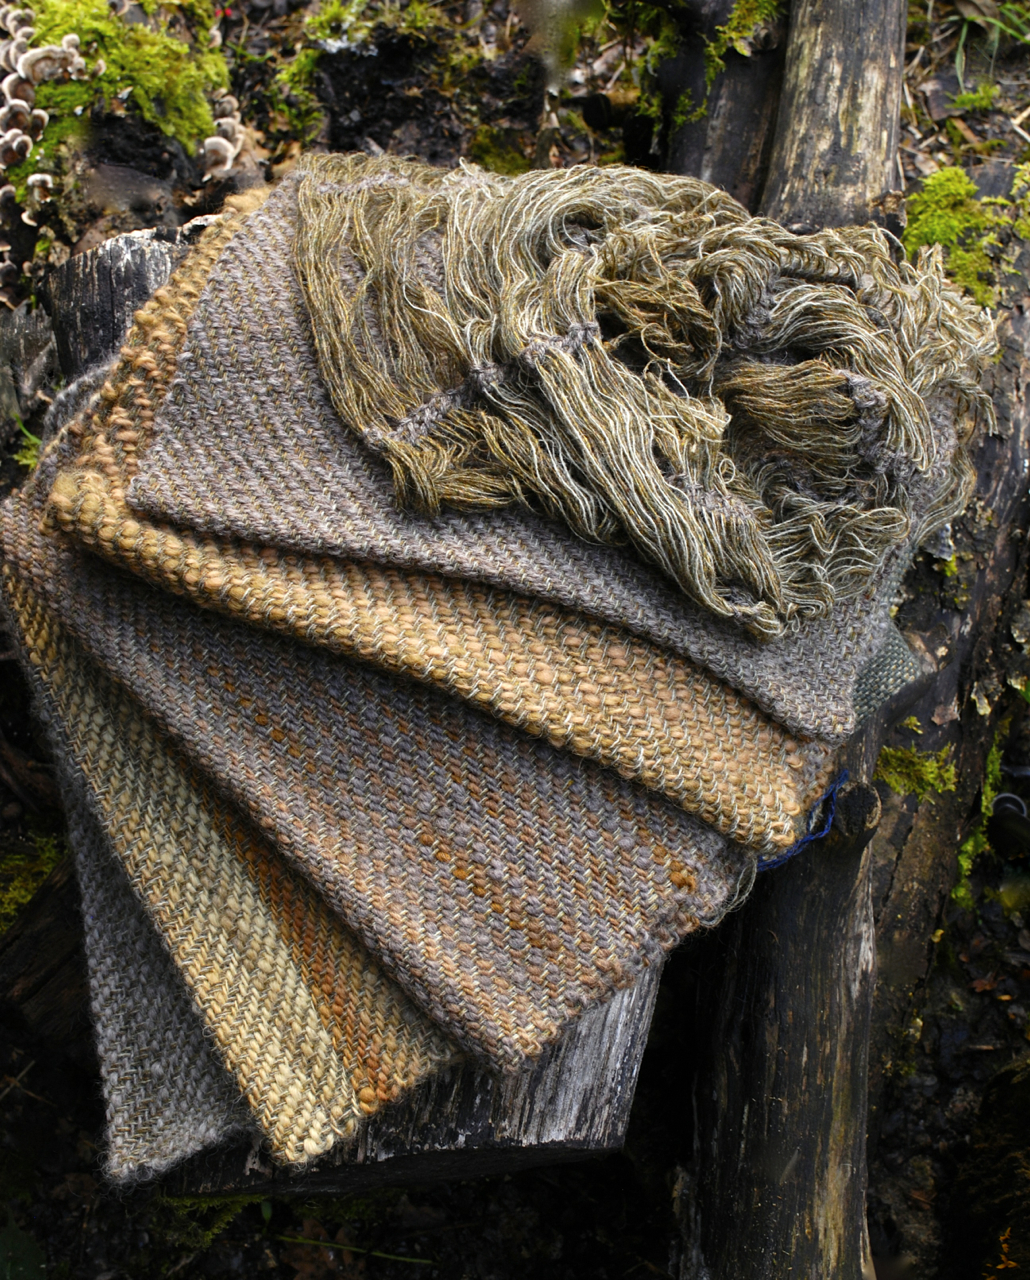 Handwoven wares from These Isles